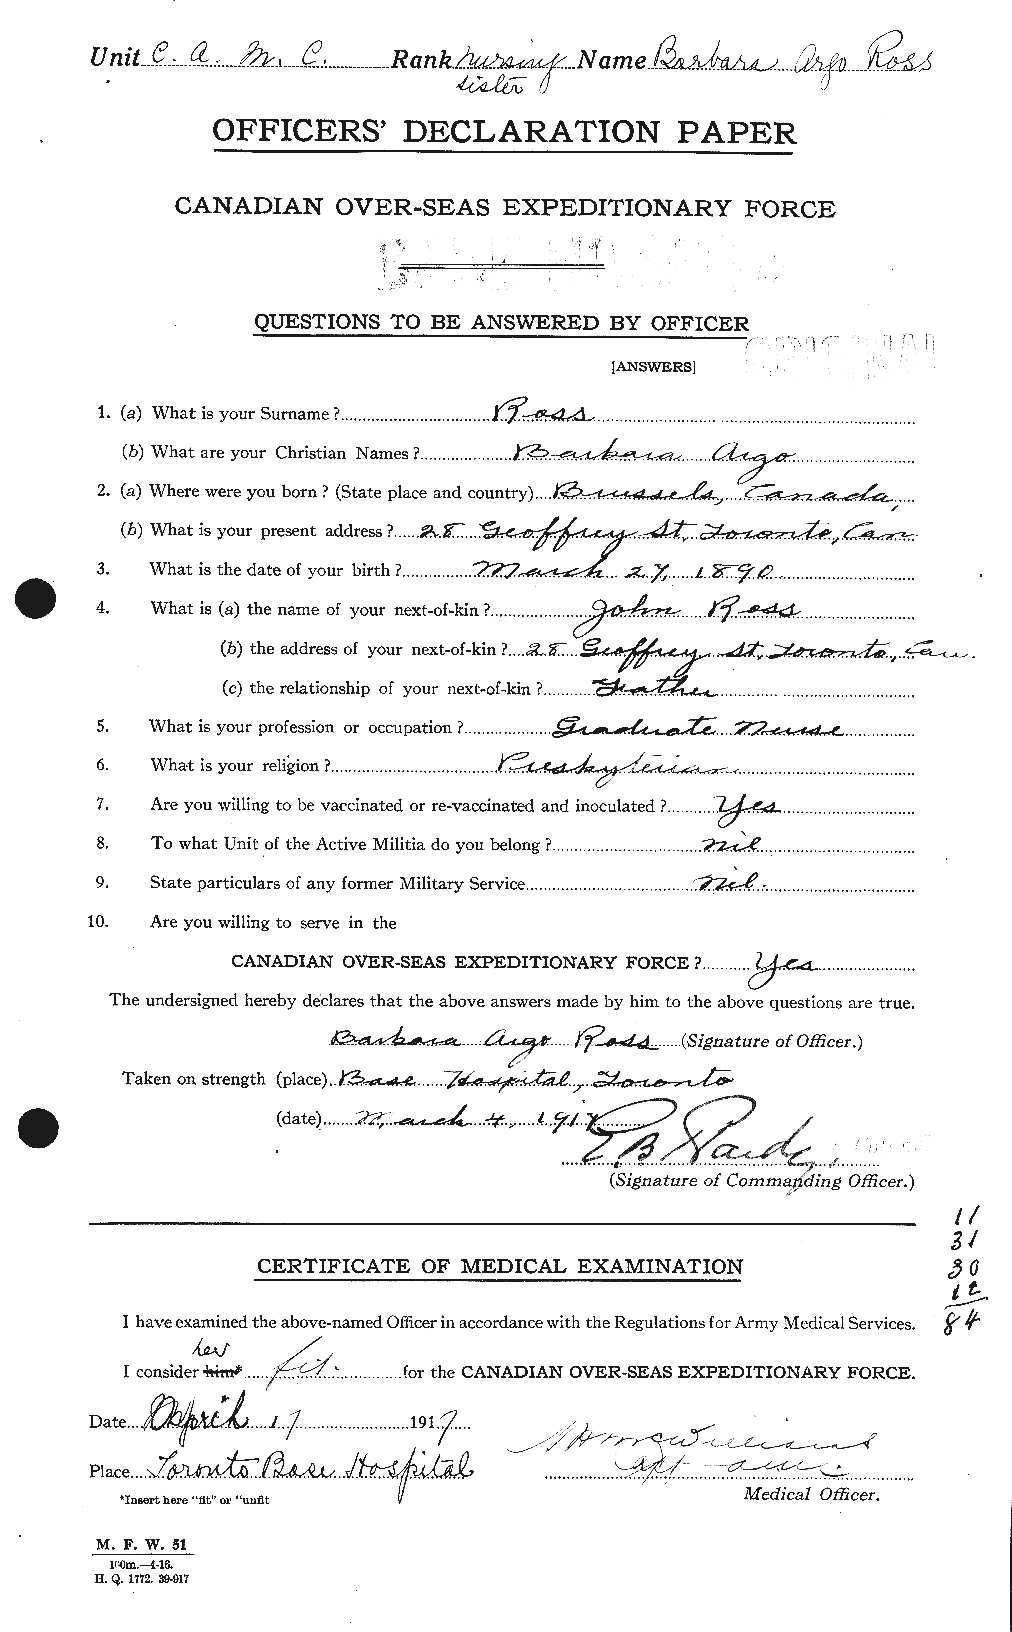 Personnel Records of the First World War - CEF 612712a